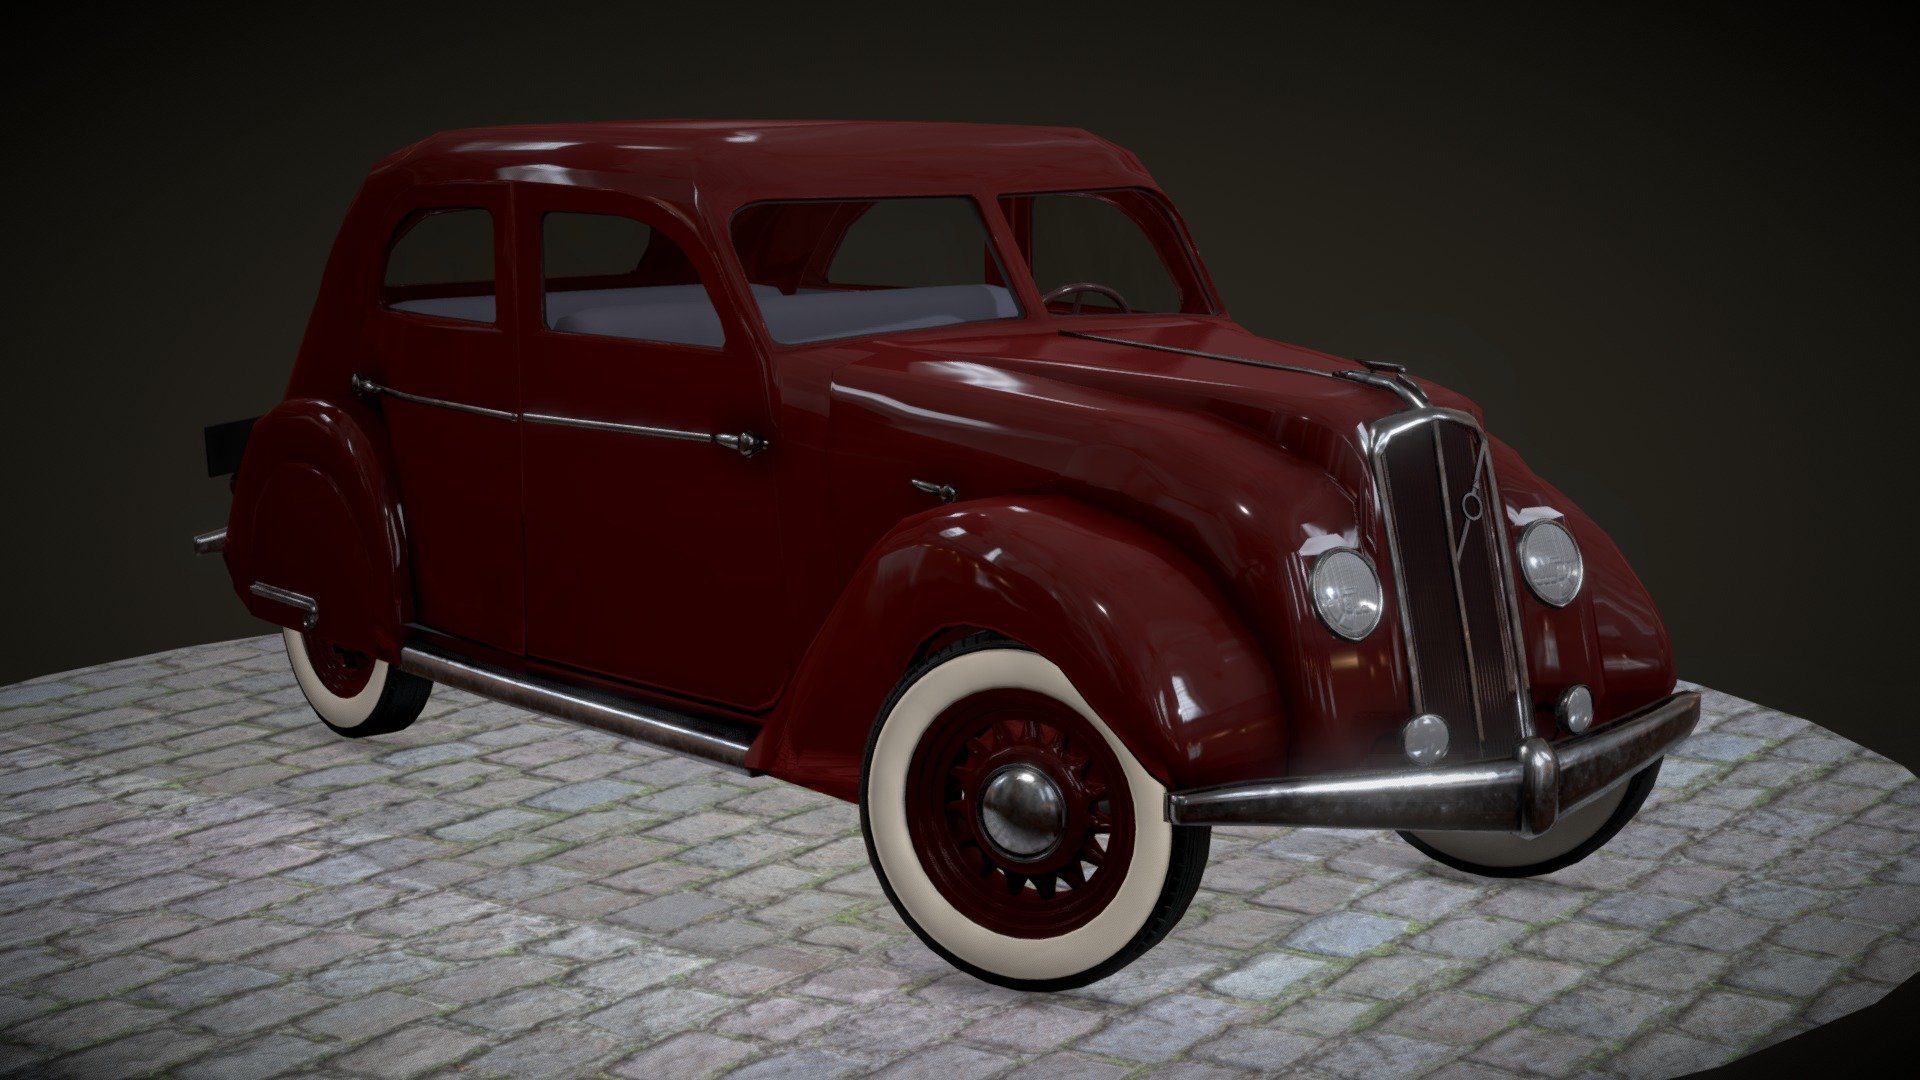 Volvo PV36 &lsquo;Carioca' sedan I made for my game project. I am making it free to download, but if you do, please consider supporting my work on my ko-fi https://ko-fi.com/robinmik 
cheers! - Volvo PV36 Carioca 1936 - Download Free 3D model by Libau Media (@robinmikart) 3d model